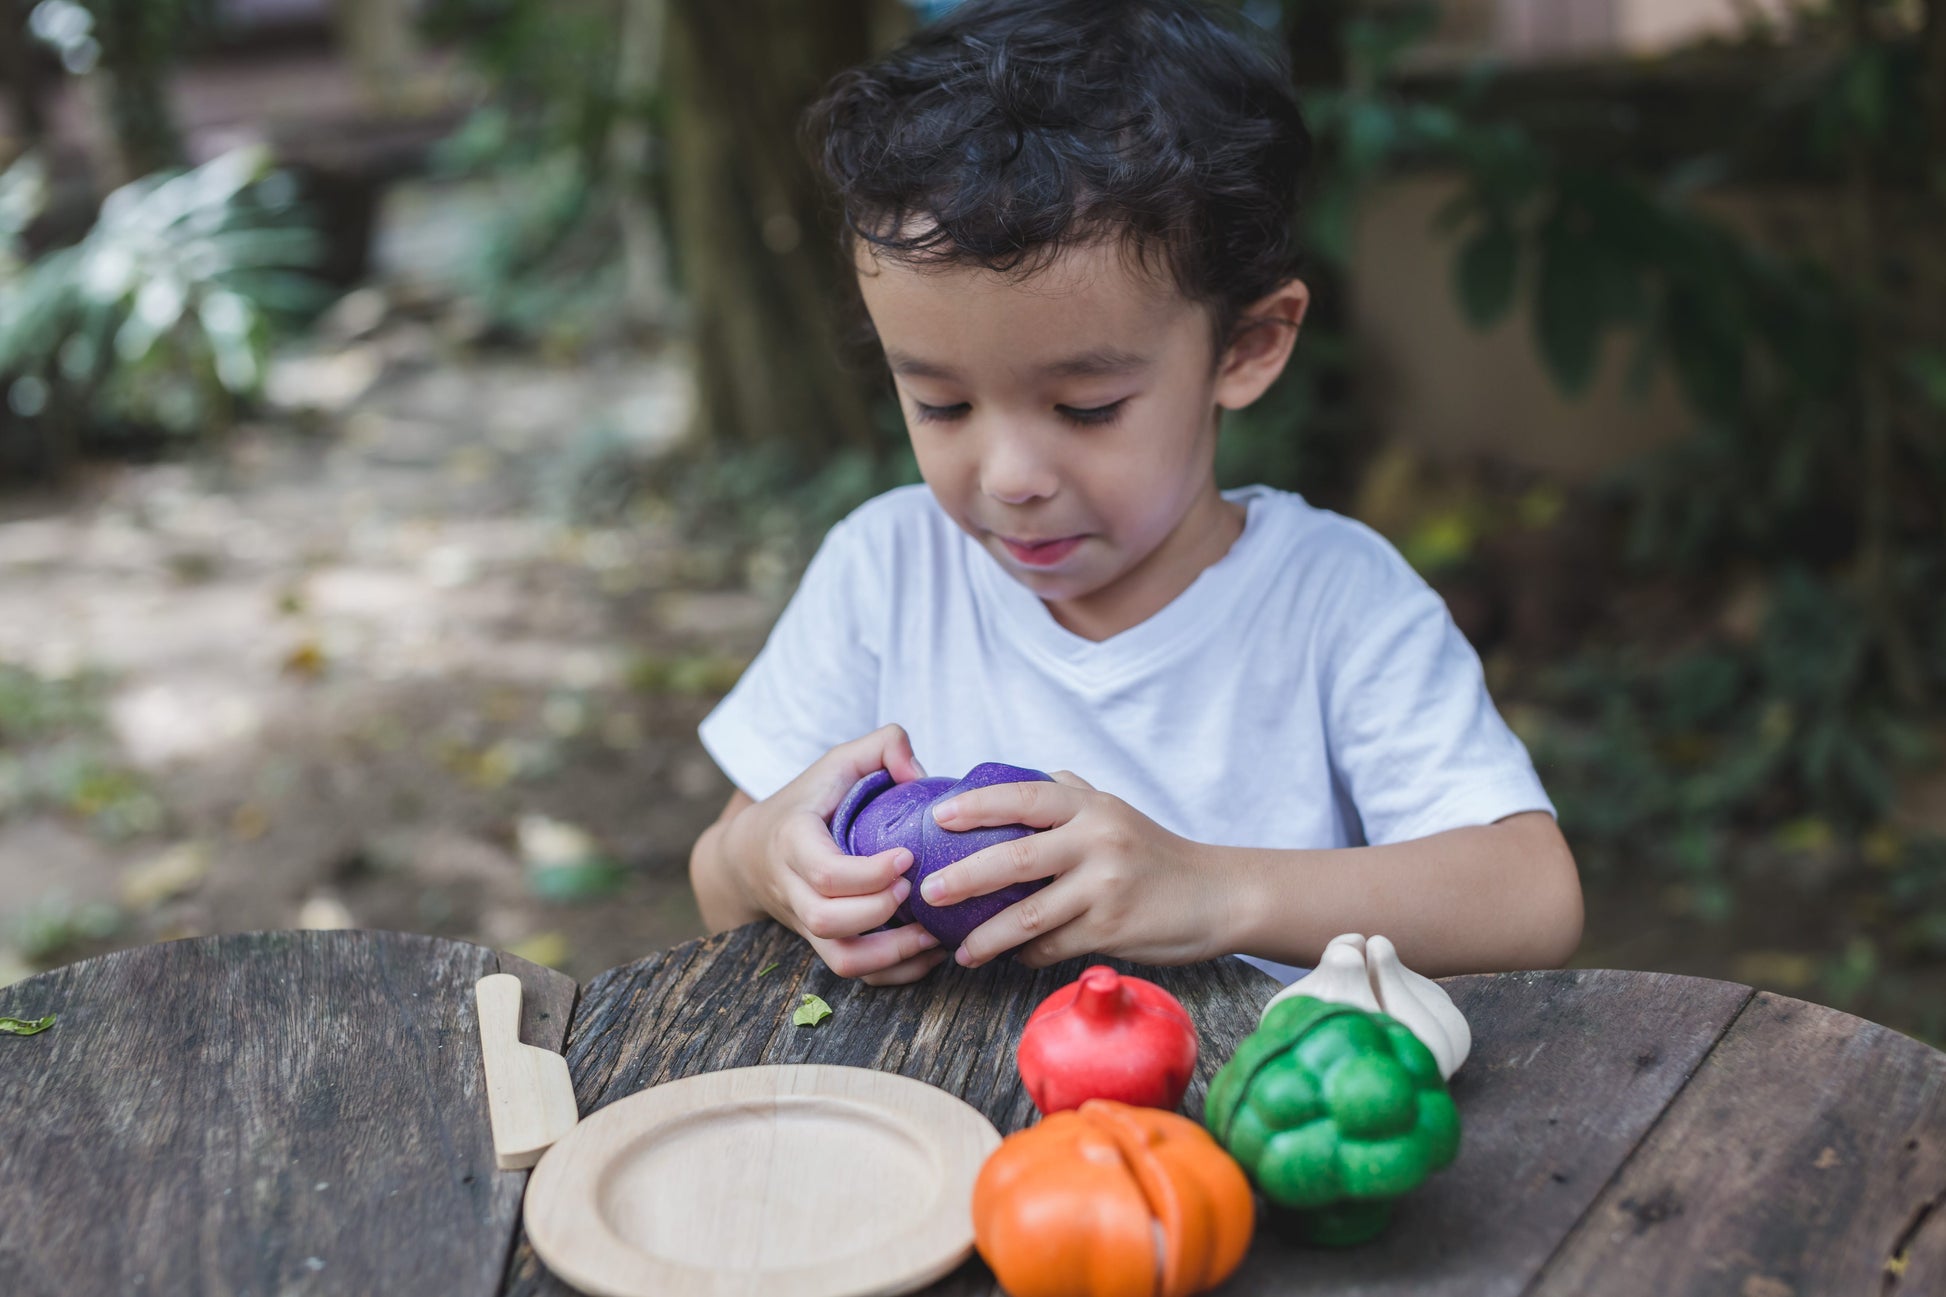 A child playing with a wooden vegetable set on a wood table outdoors. The child osopening the onion